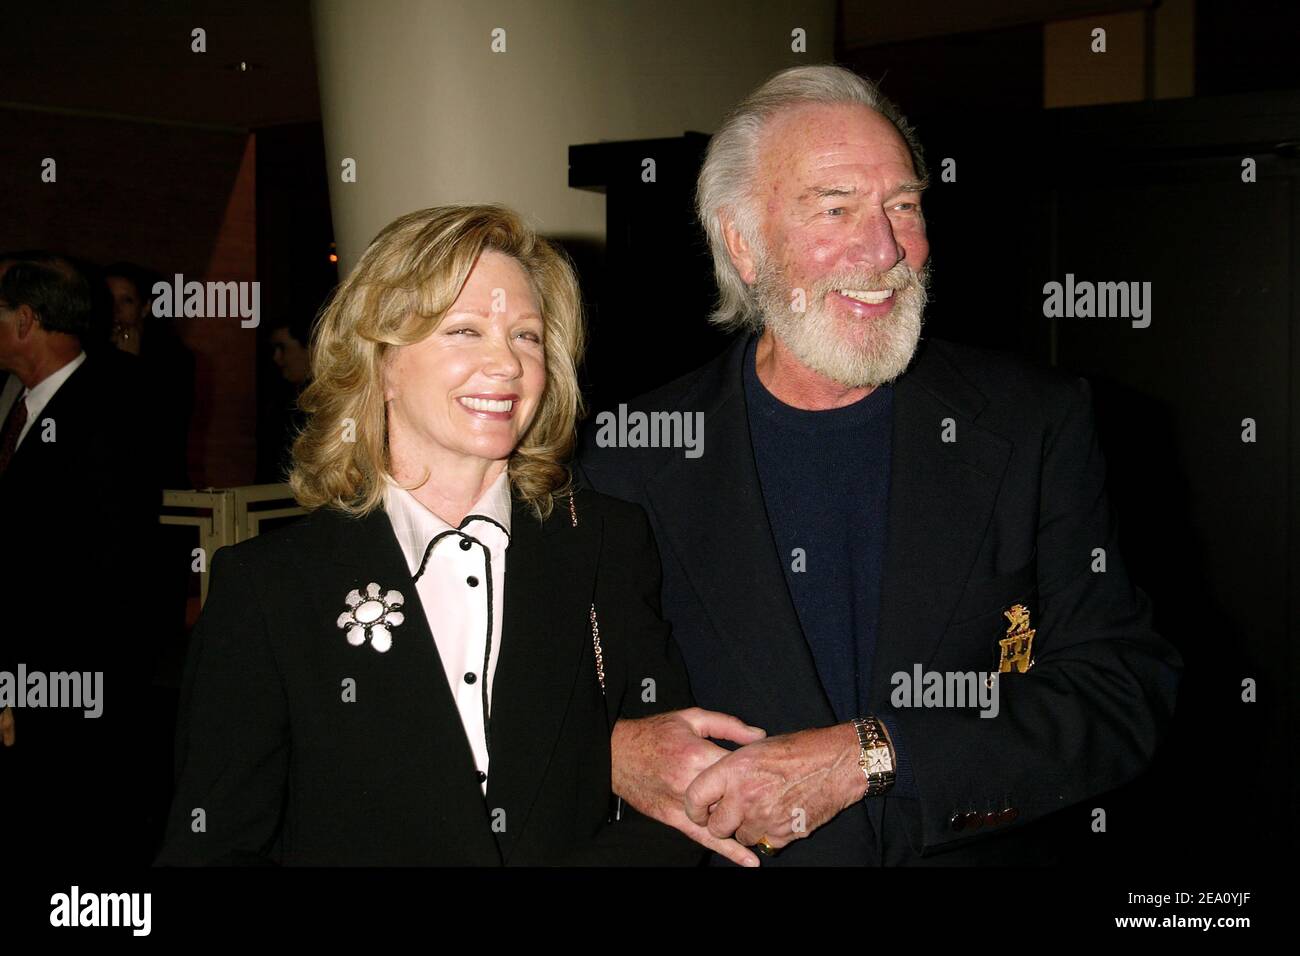 NEW YORK, NY- MARCH 4: Elaine Taylor Plummer and Christopher Plummer attending the opening night party for King Lear held at Avery Fisher Hall, on March 4, 2004, in New York City. Credit: Joseph Marzullo/MediaPunch Stock Photo